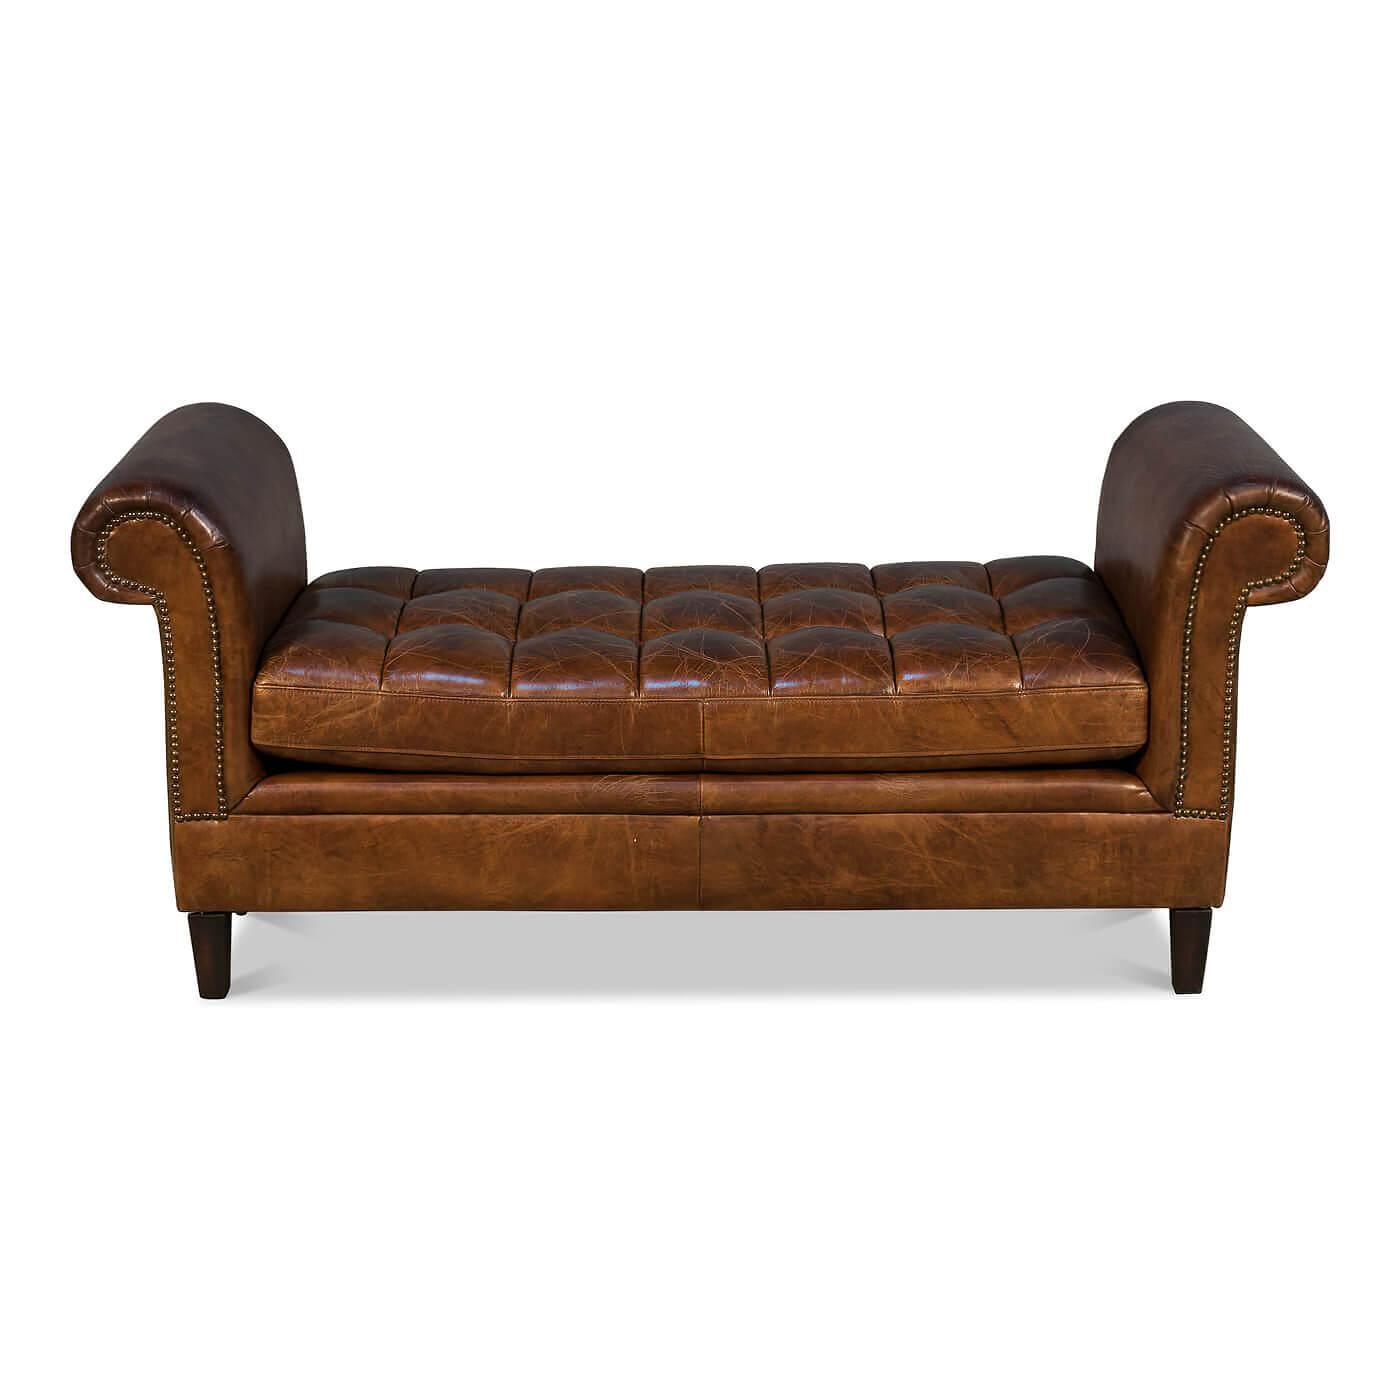 A tufted leather scroll arm window bench with nailhead trim. This piece has a timeless classic look with its rolled arm design and traditional rich brown color. The center seat cushion features button tufting, and the benches frame is accented with